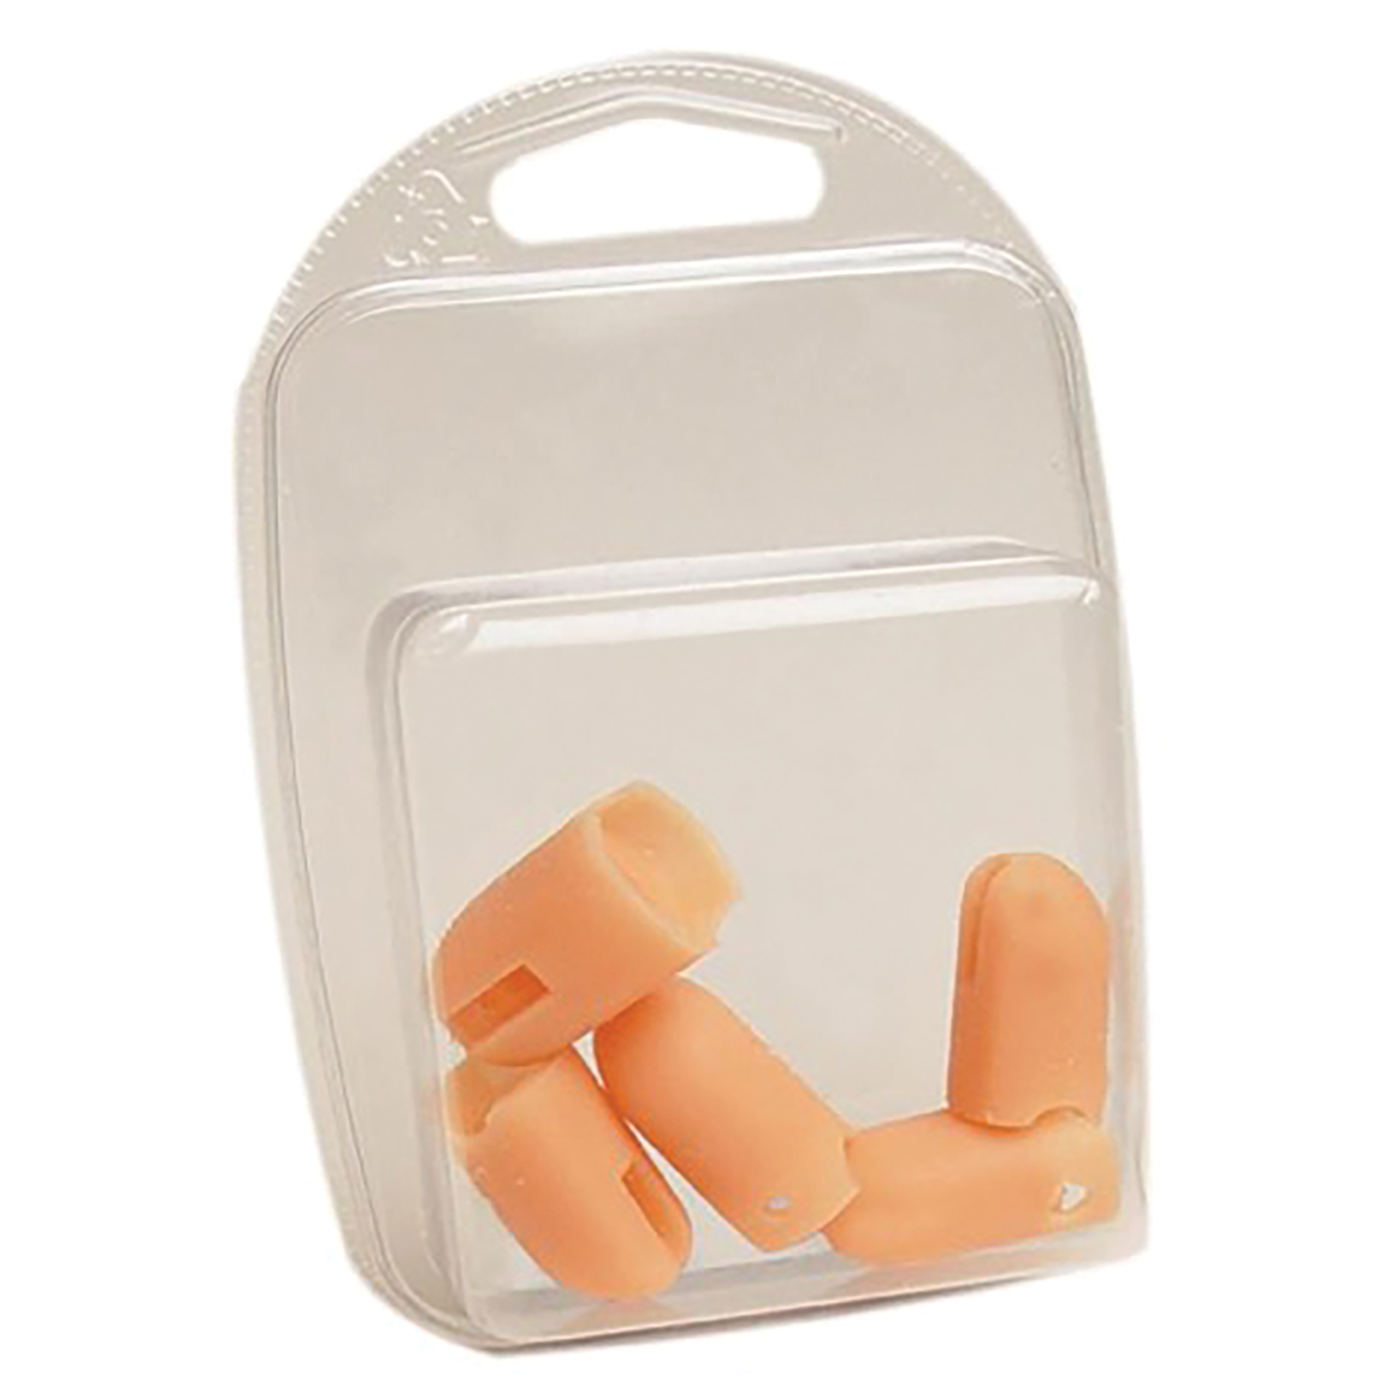 Refit Pack of 4 Fingers & 1 Thumb for Nail Trainer